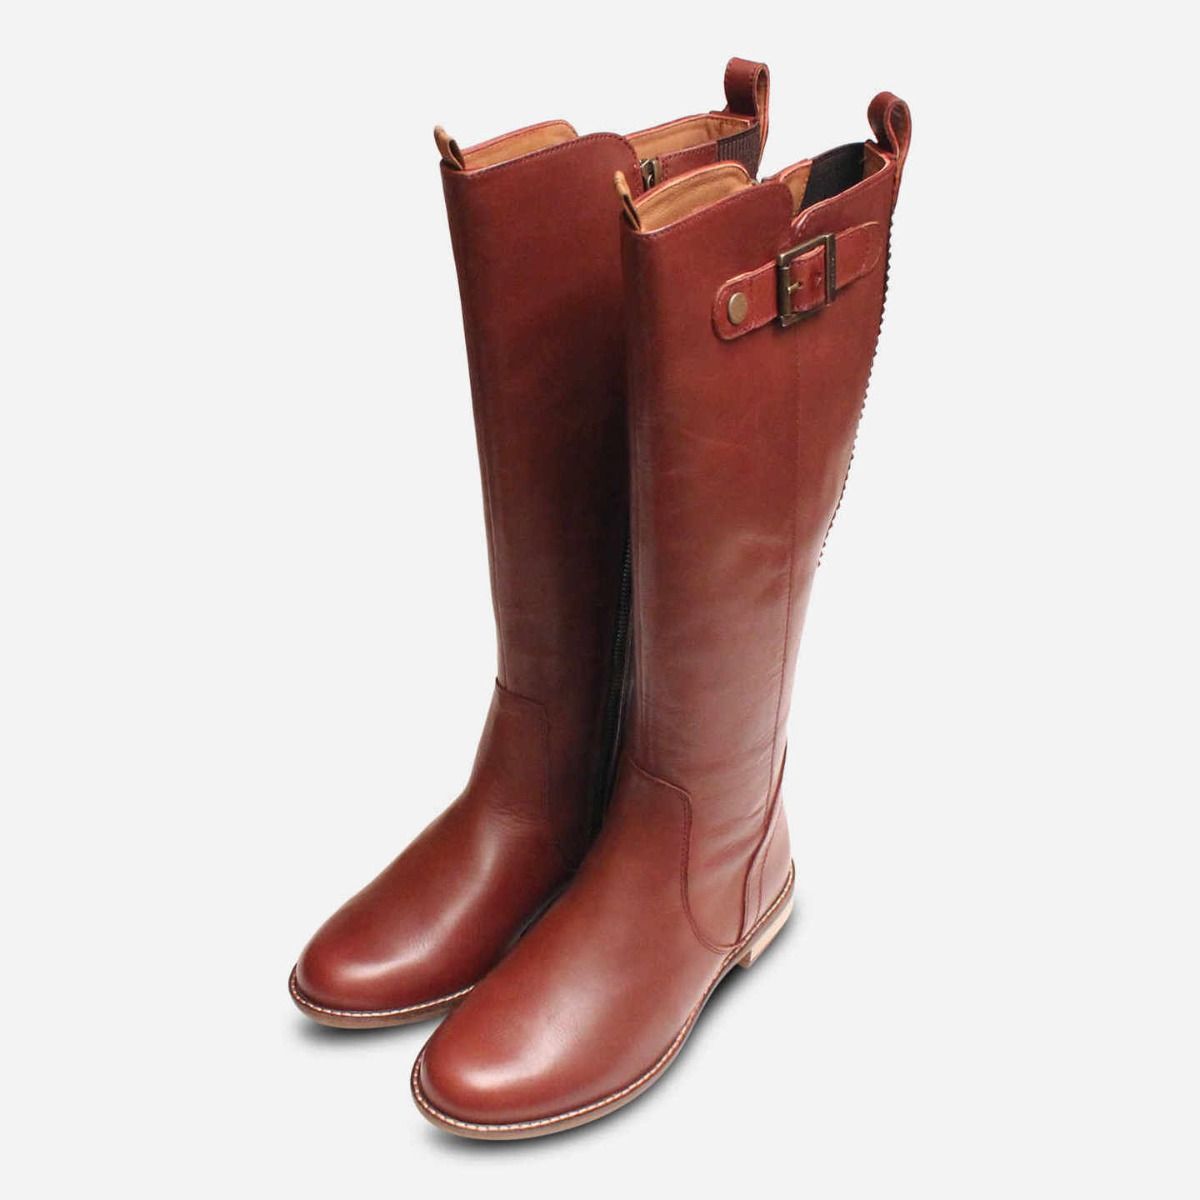 Barbour Knee High Boots in Bordeaux Leather with Rubber Sole